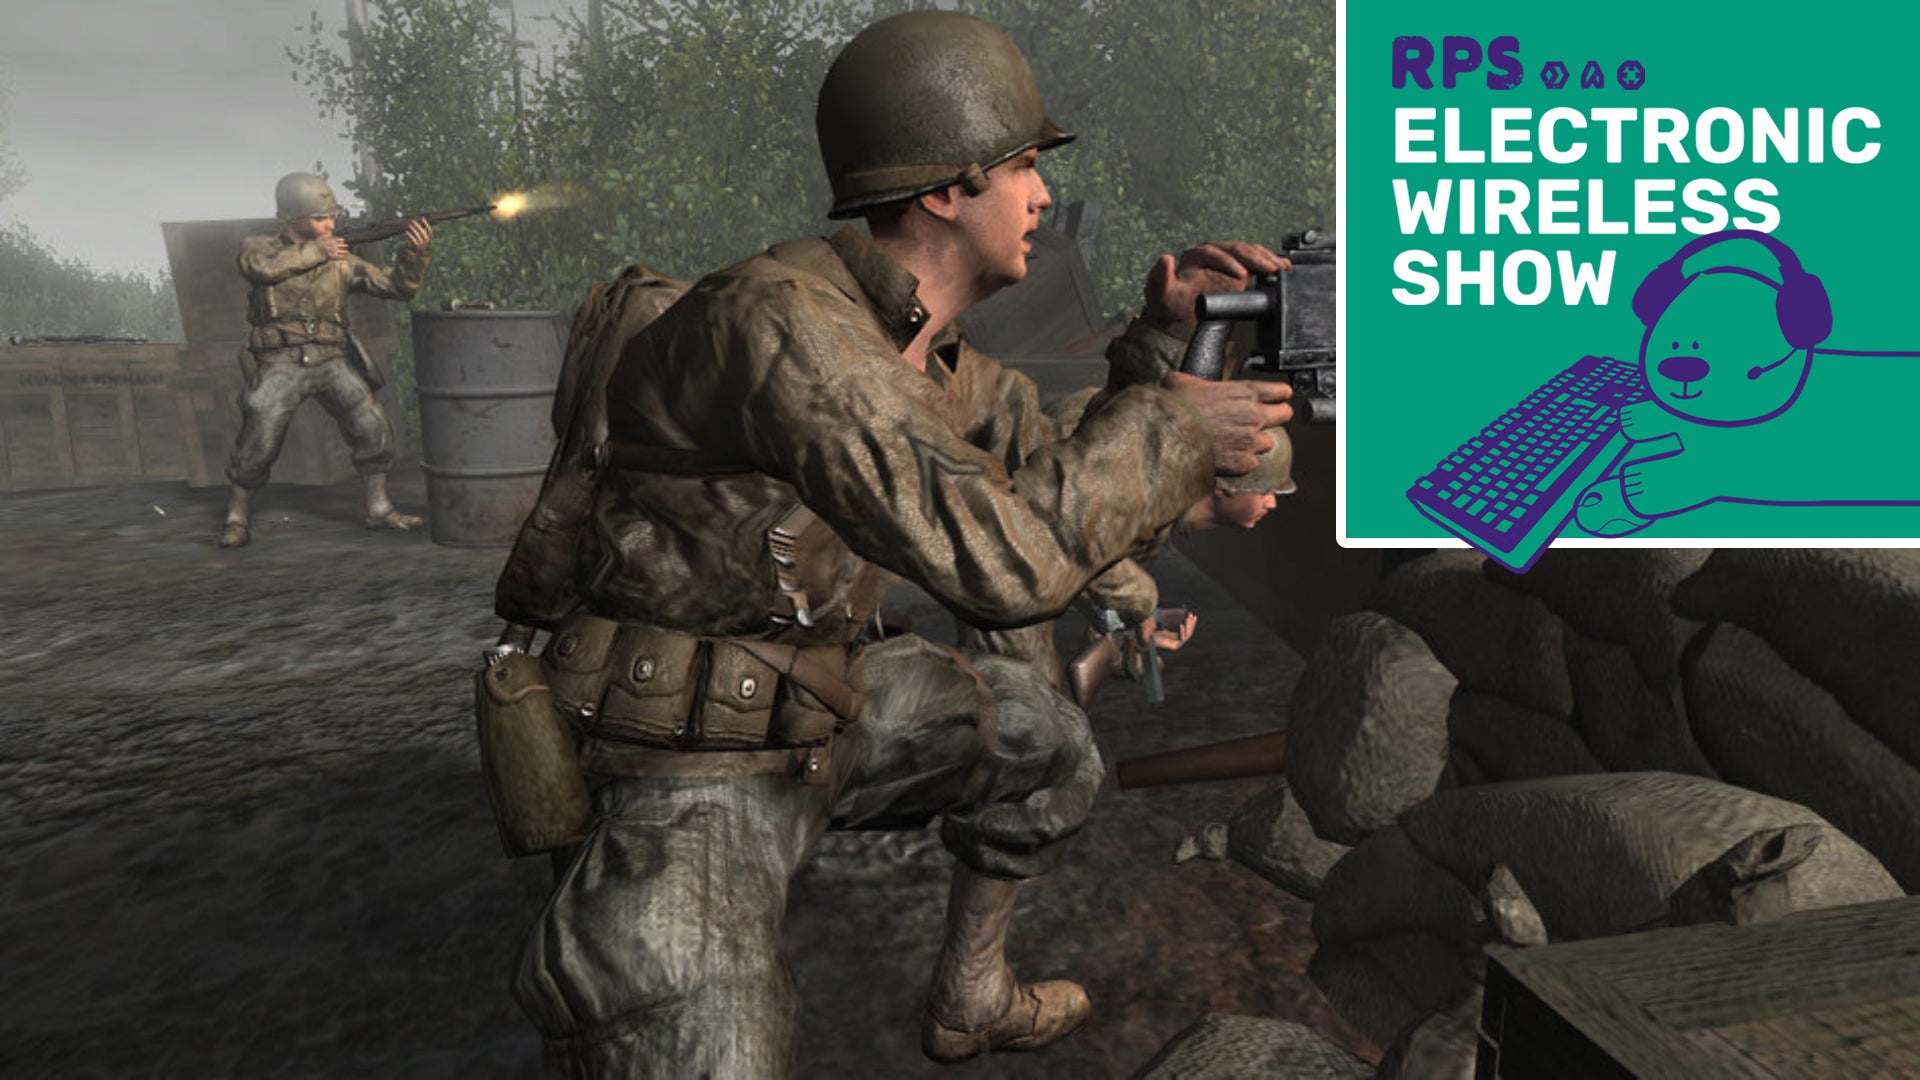 A soldier in Call Of Duty 2 crouched and shooting a mounted machine gun with the Electronic Wireless Show podcast log in the top right